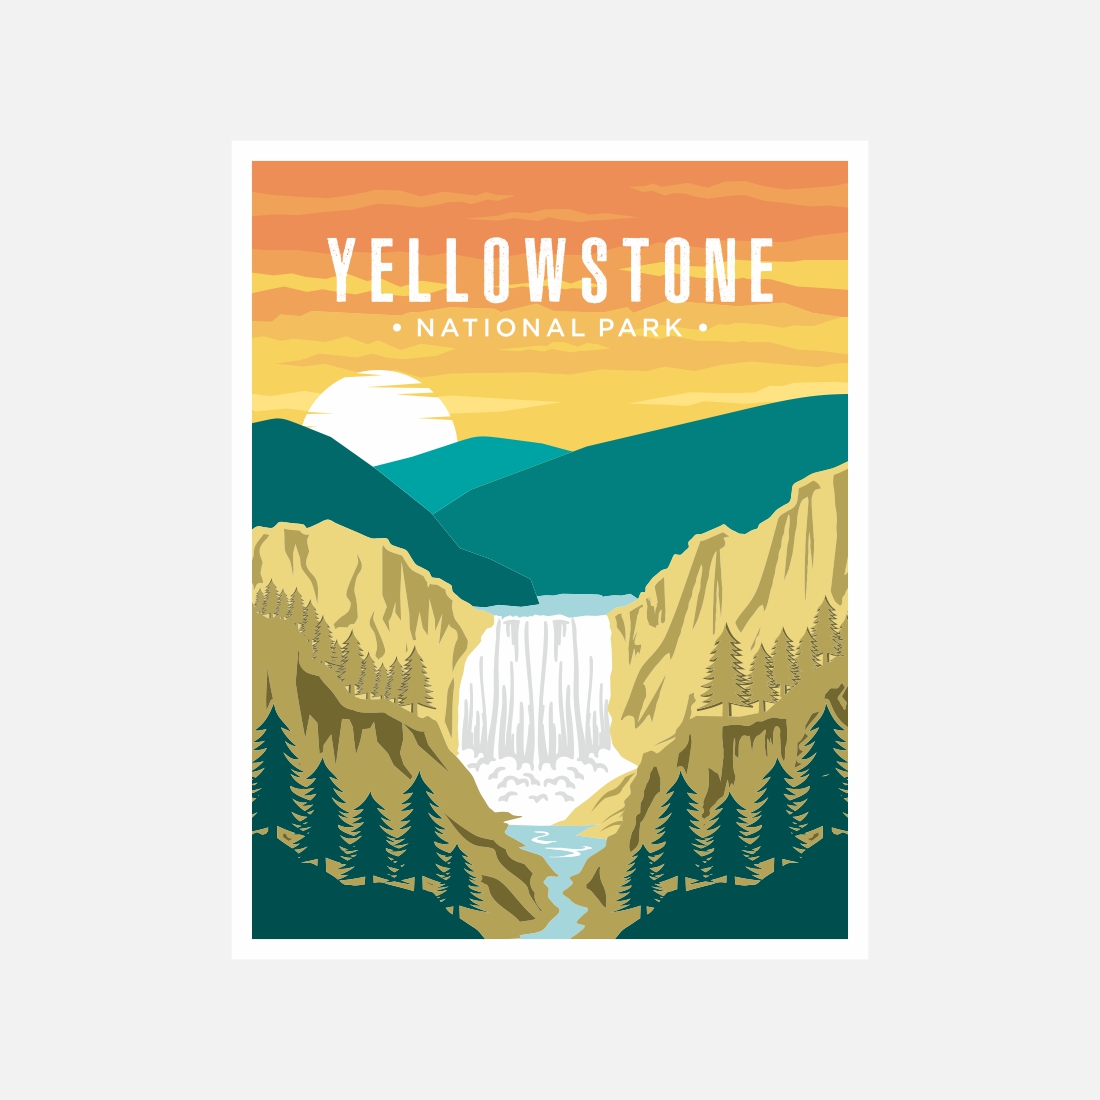 Yellowstone Falls National Park poster vector illustration design – Only $8 cover image.